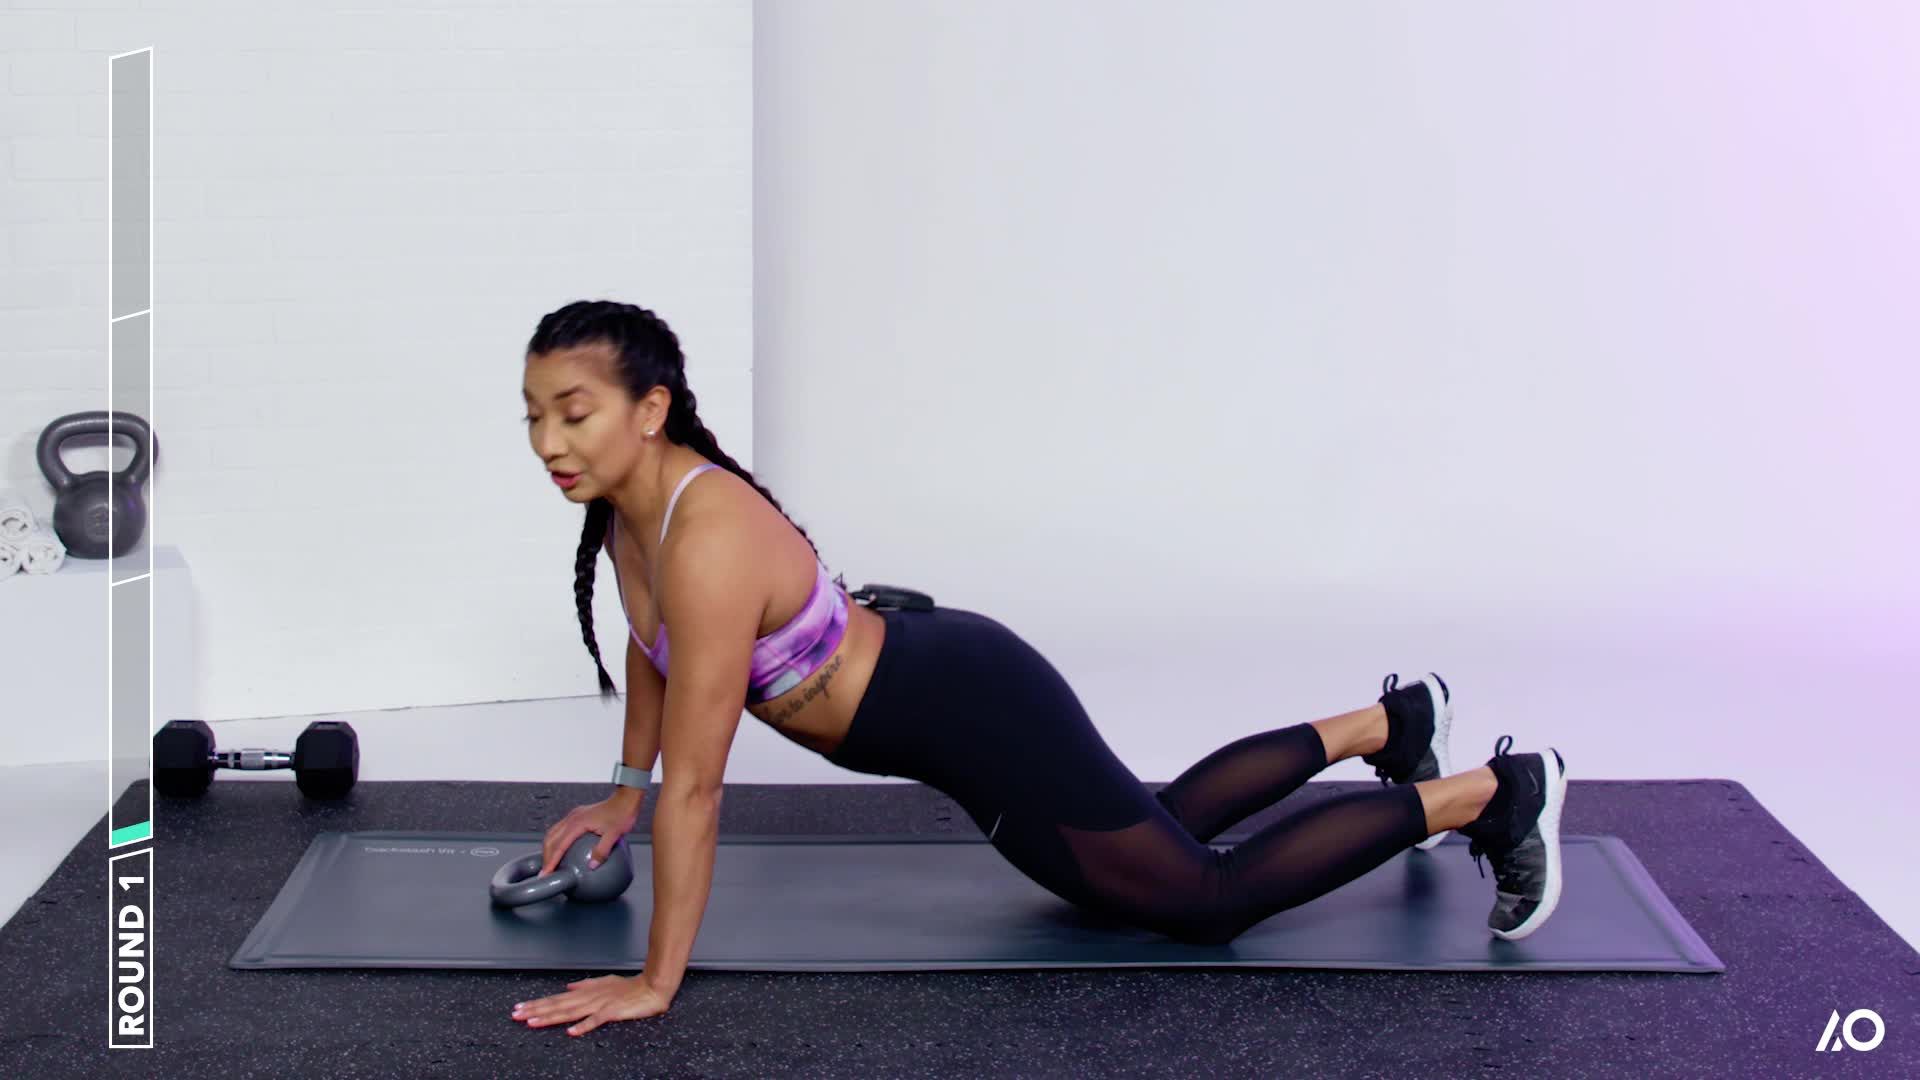 3 exercises to make breast more firm and perky. SAVE + TRY + SHARE